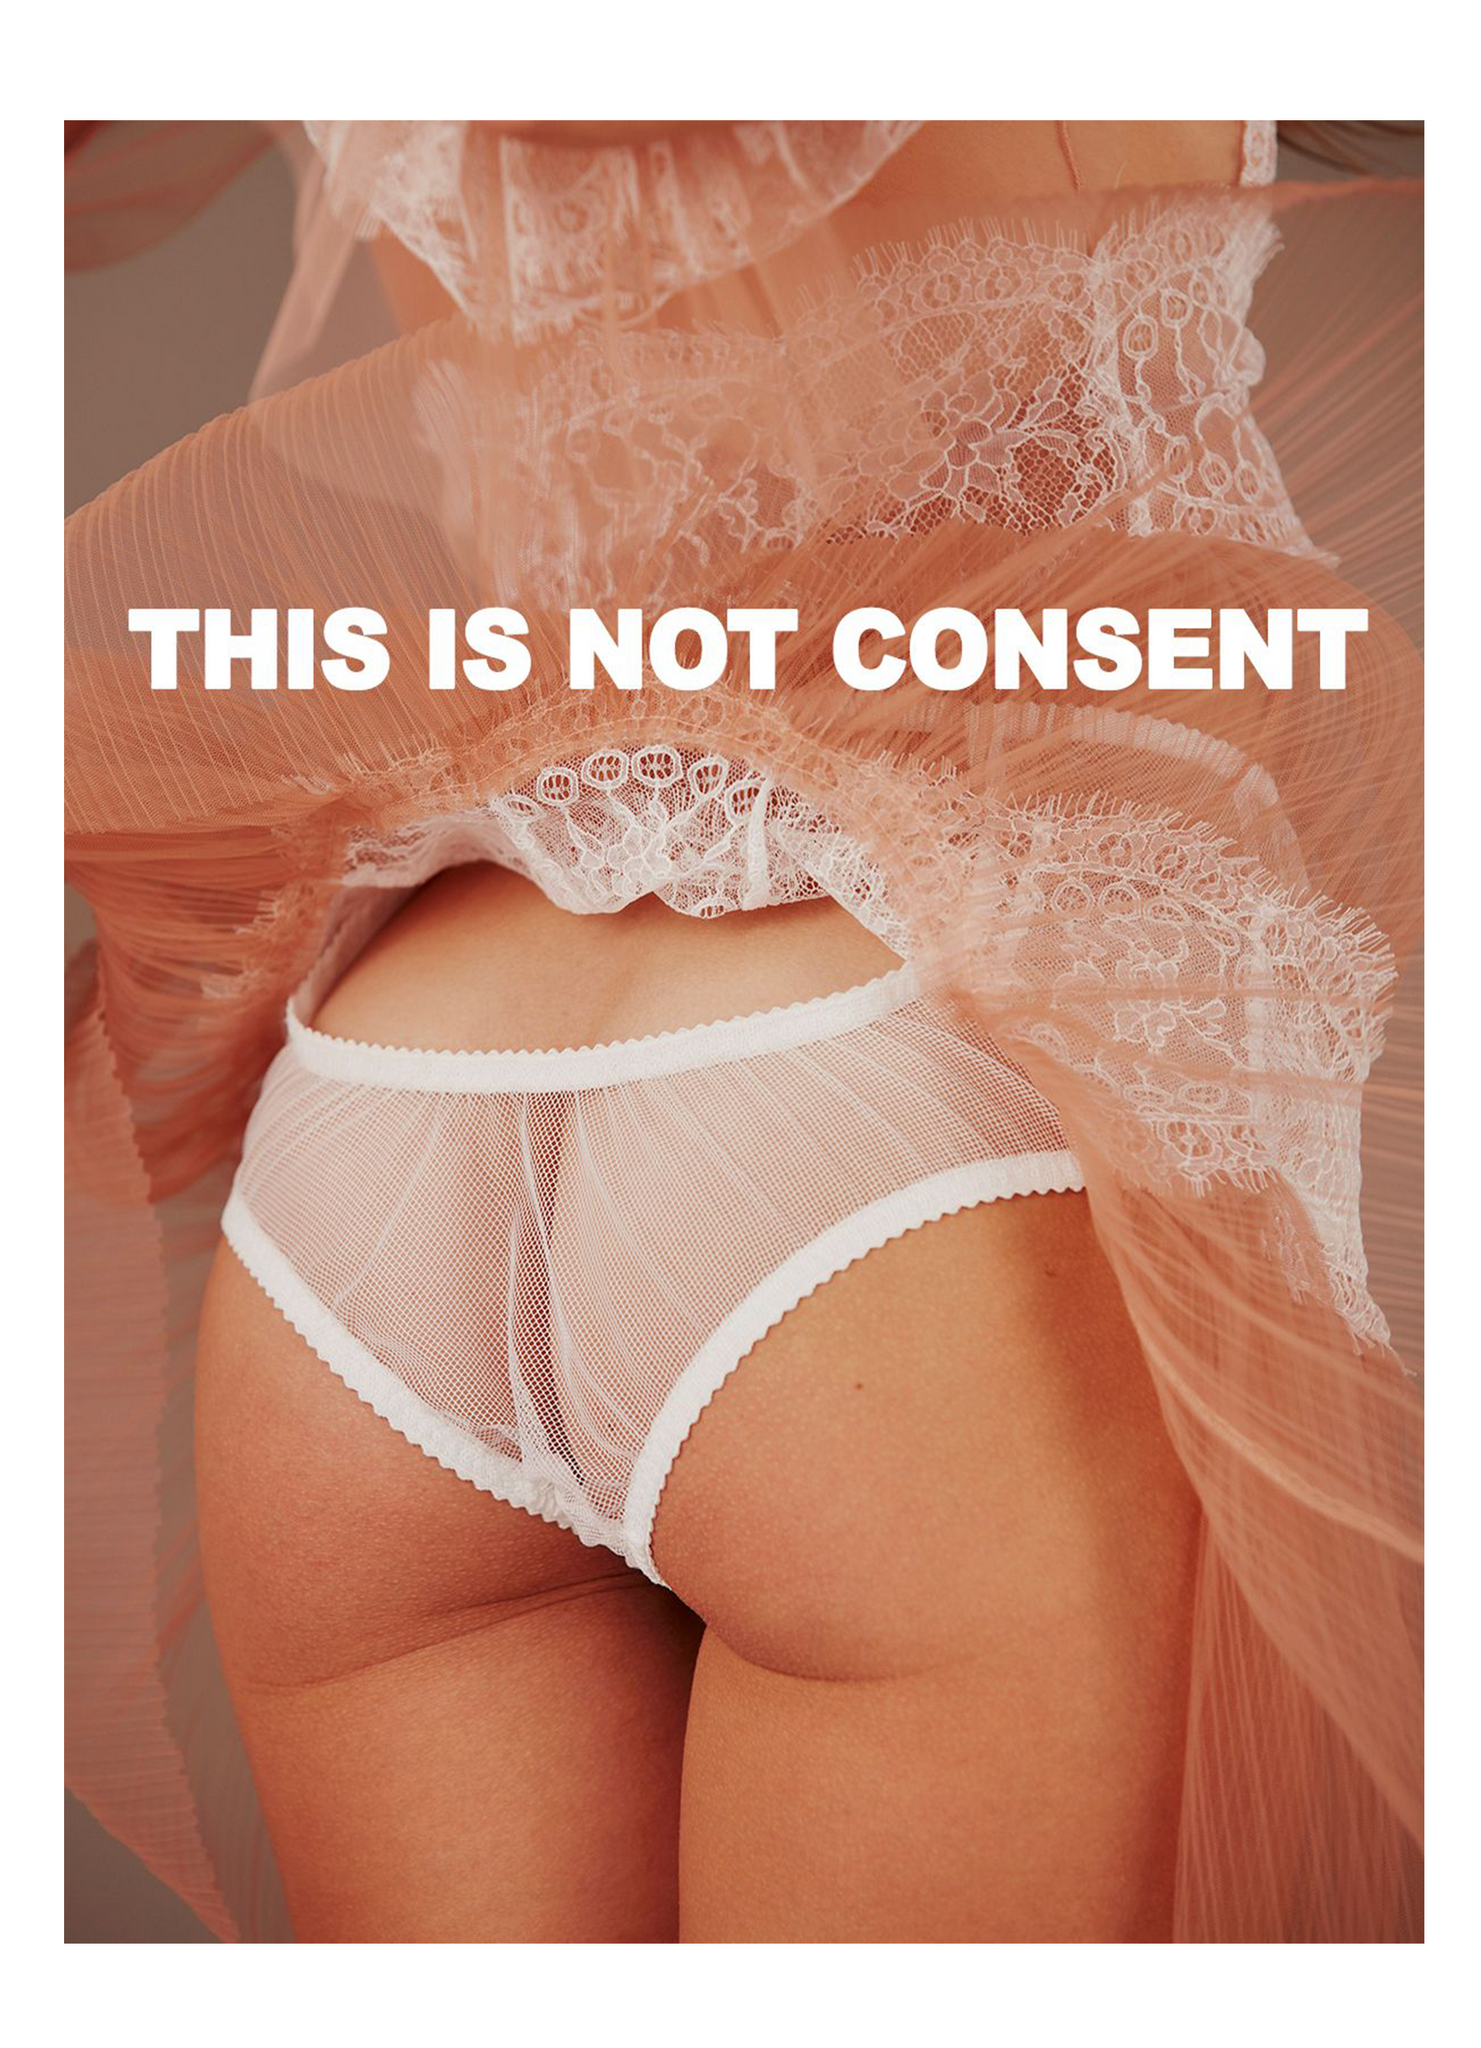 Charlotte Abramow - This is Not Consent, 2021